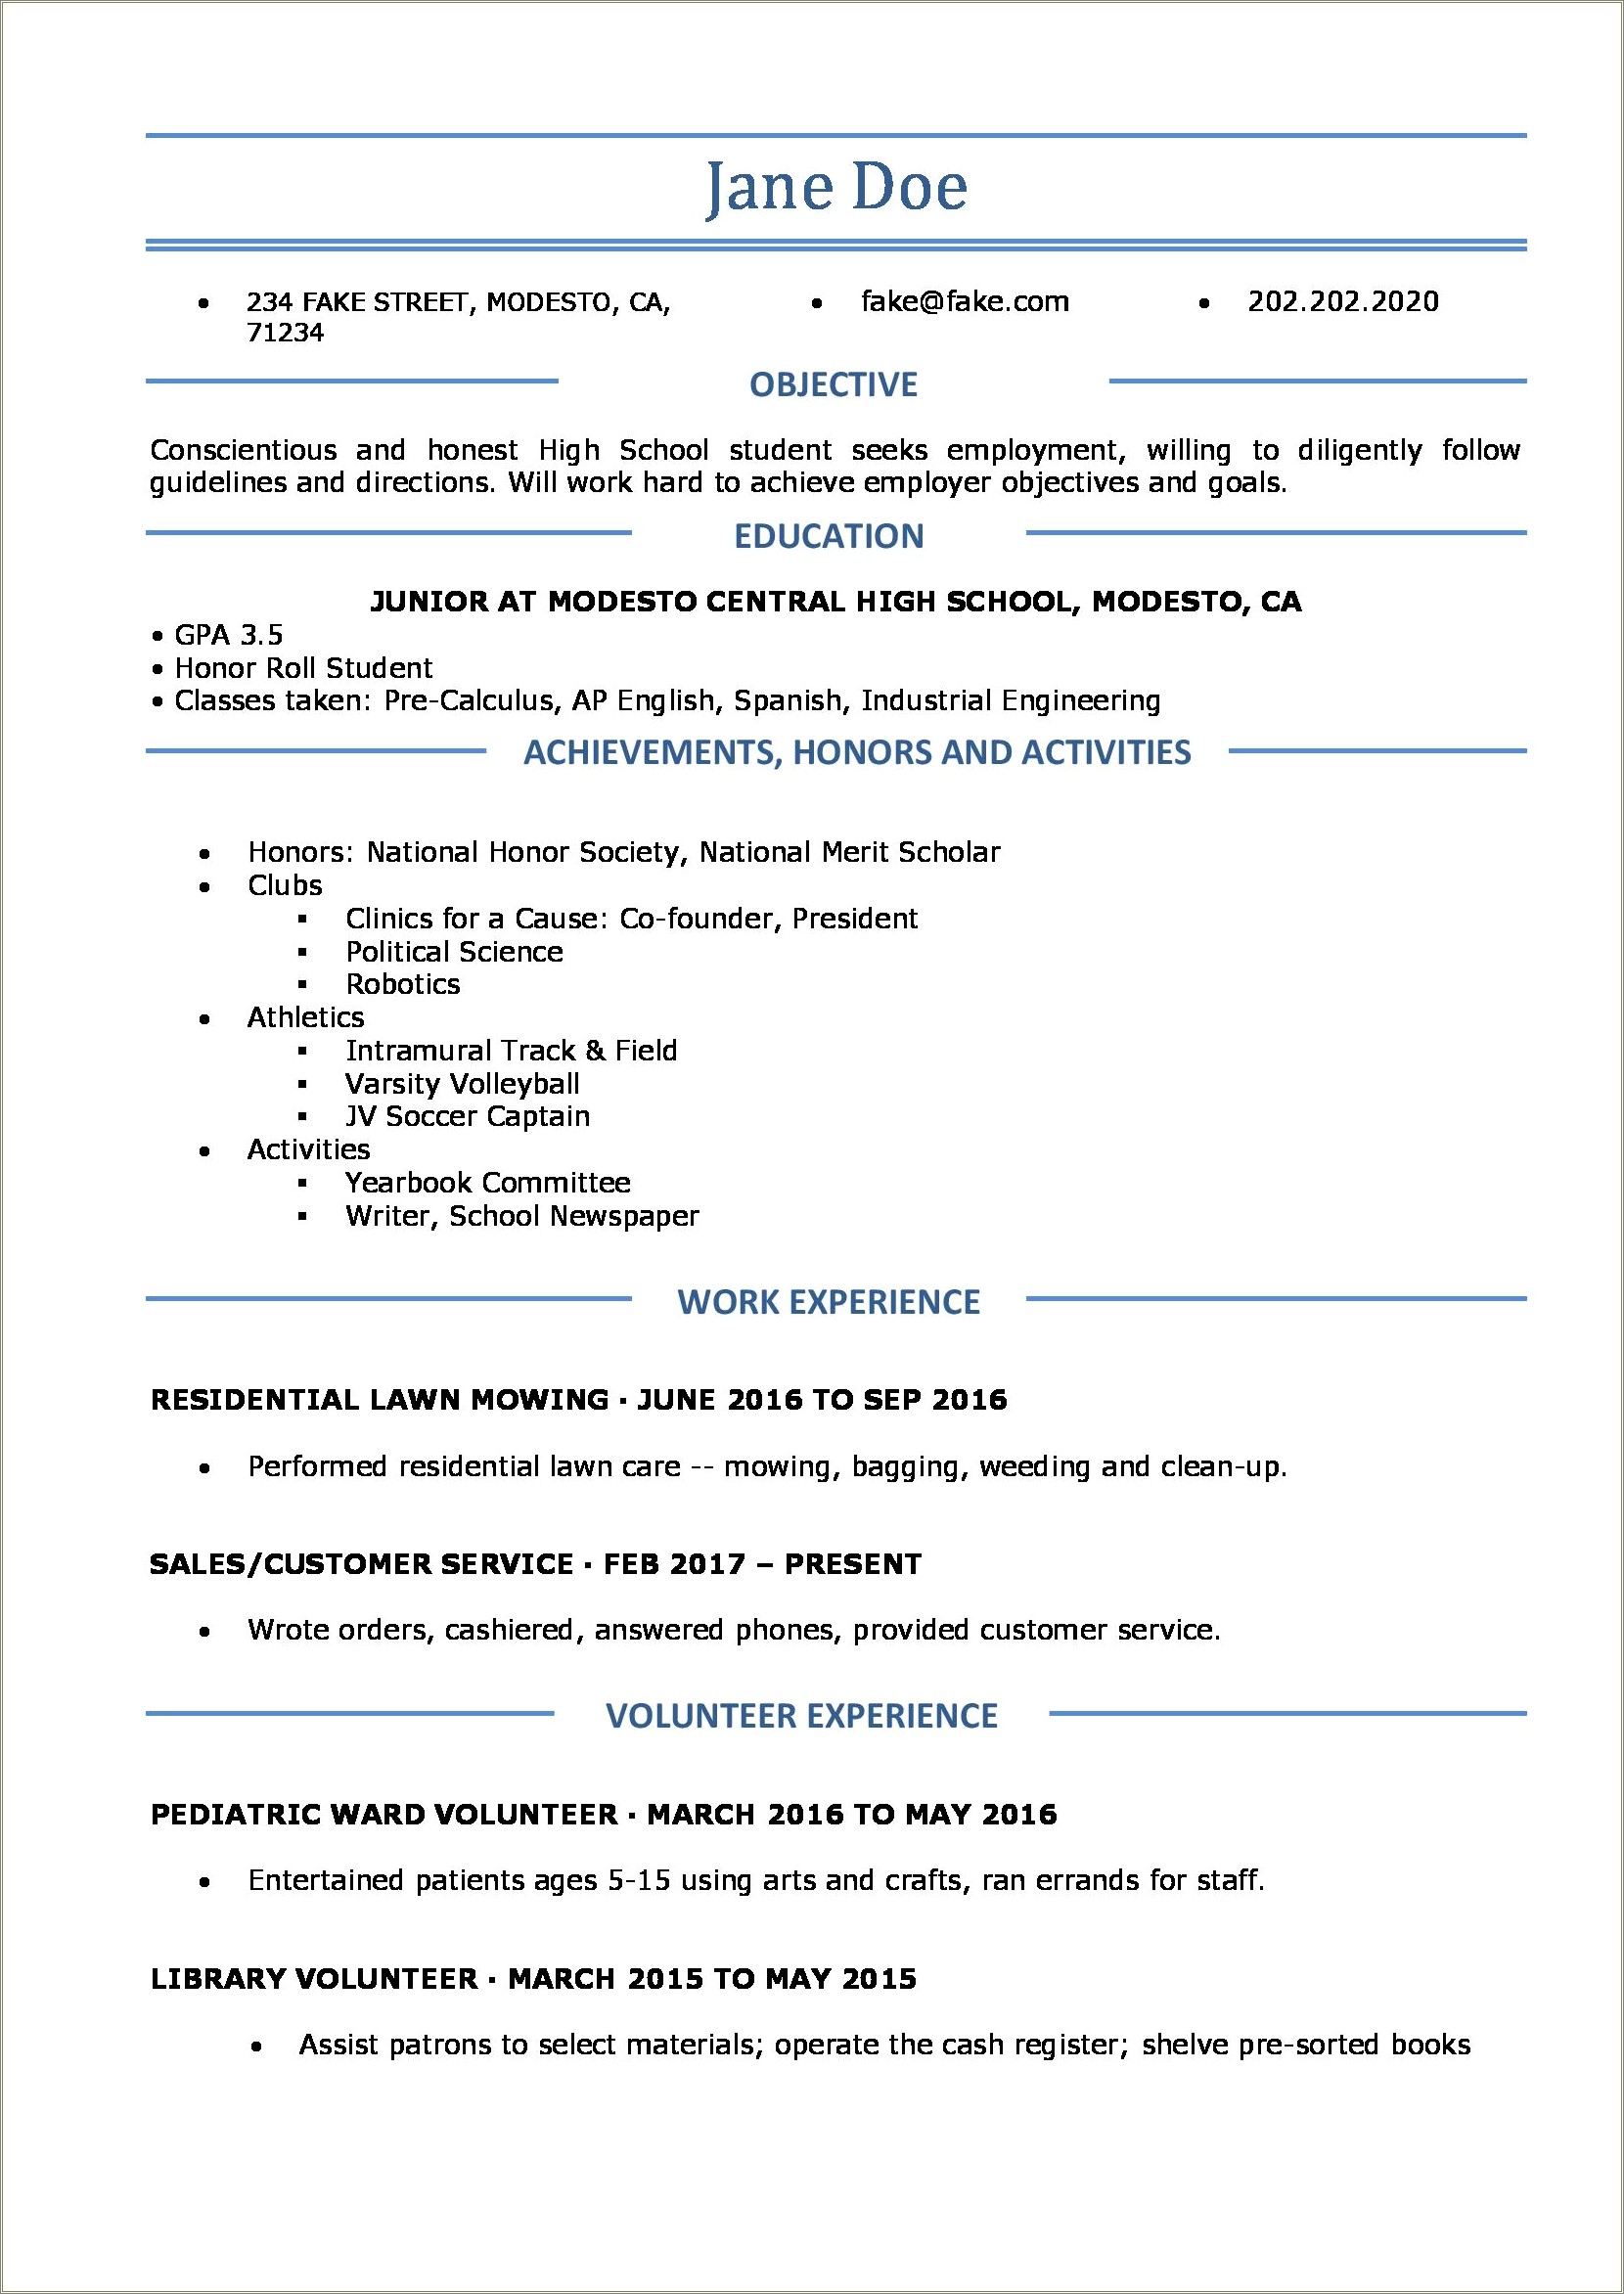 Resume Packet For High School Students